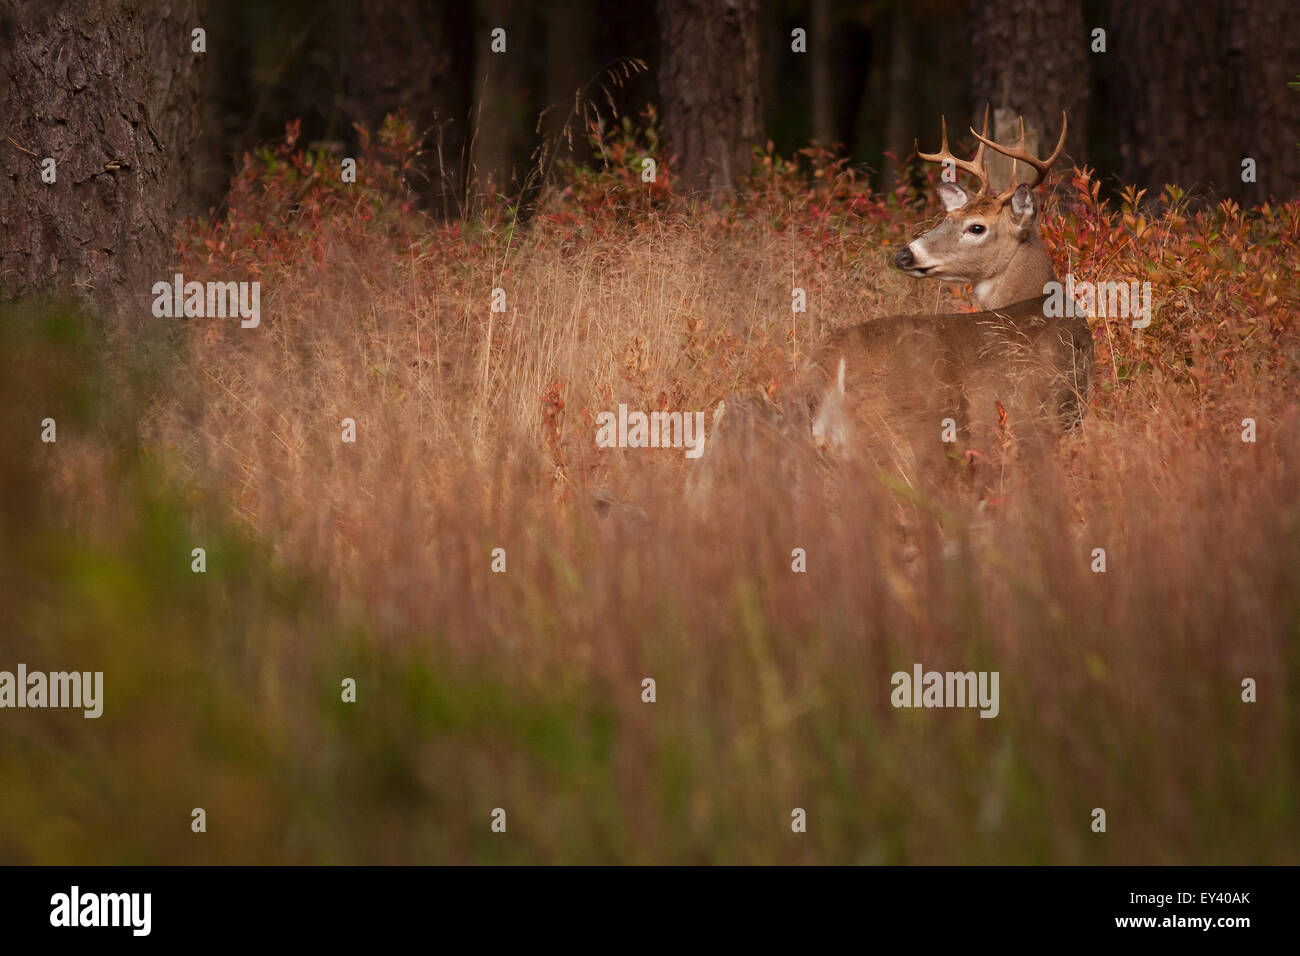 Male deer with antlers camouflaged in tall grass. Stock Photo